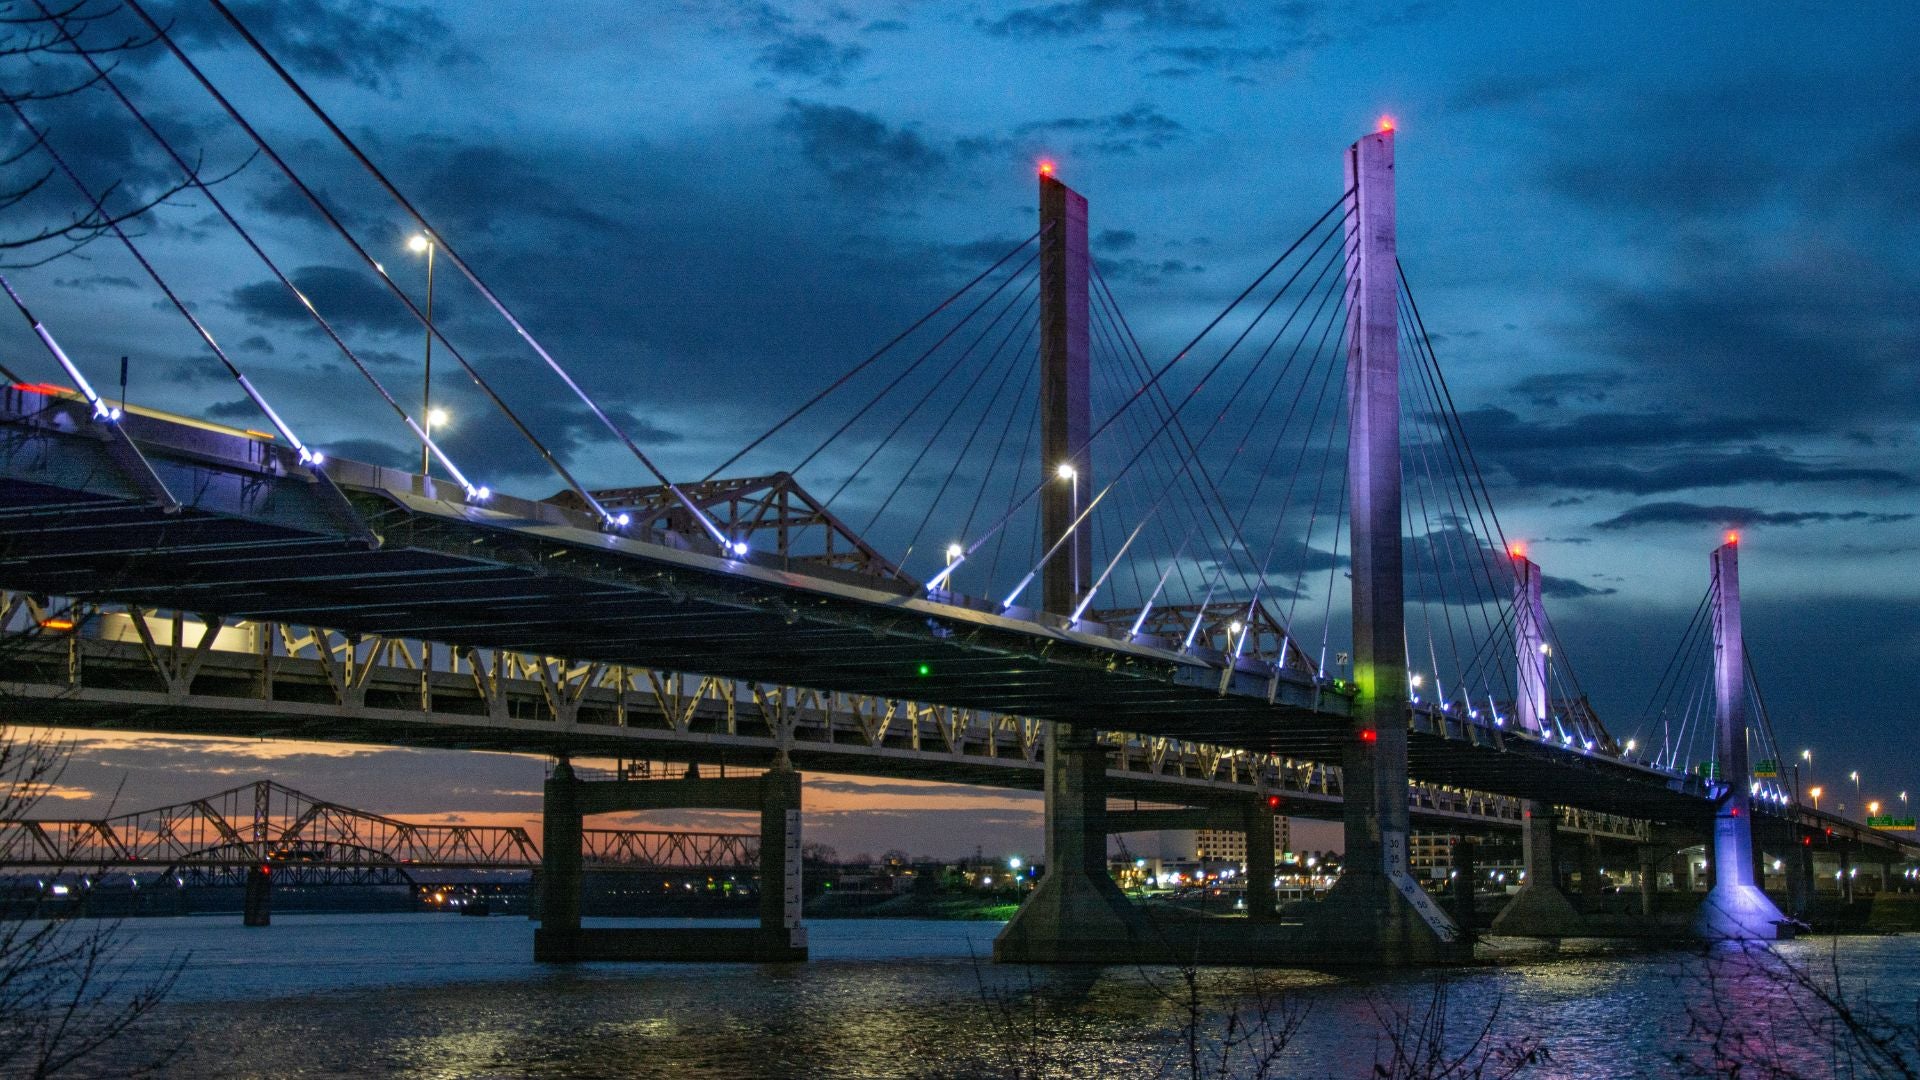 Abraham Lincoln Bridge in Louisville, KY at night. - History By Mail